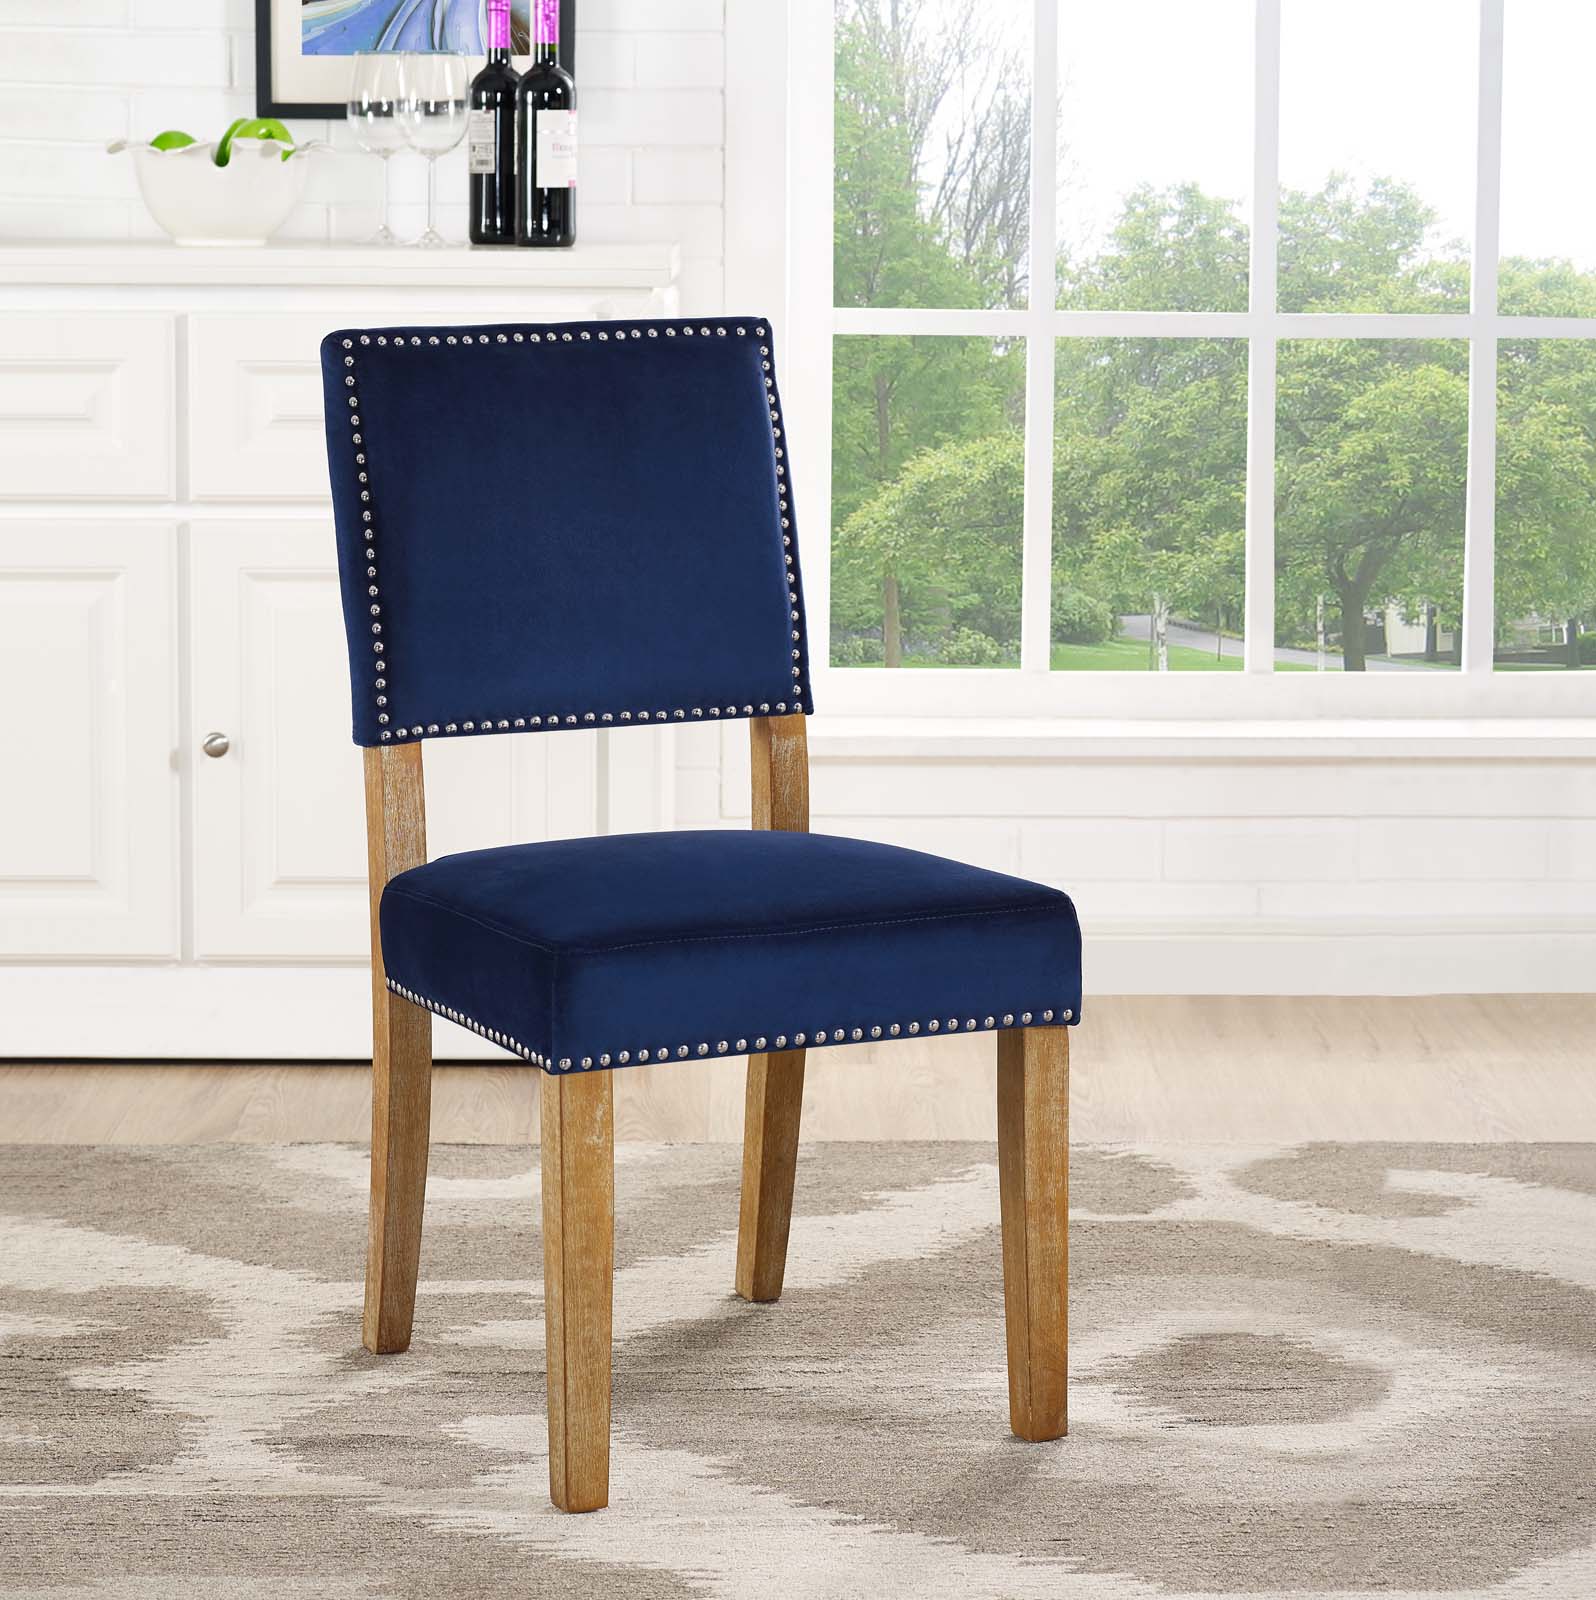 Modway Dining Chairs - Oblige Wood Dining Chair Navy